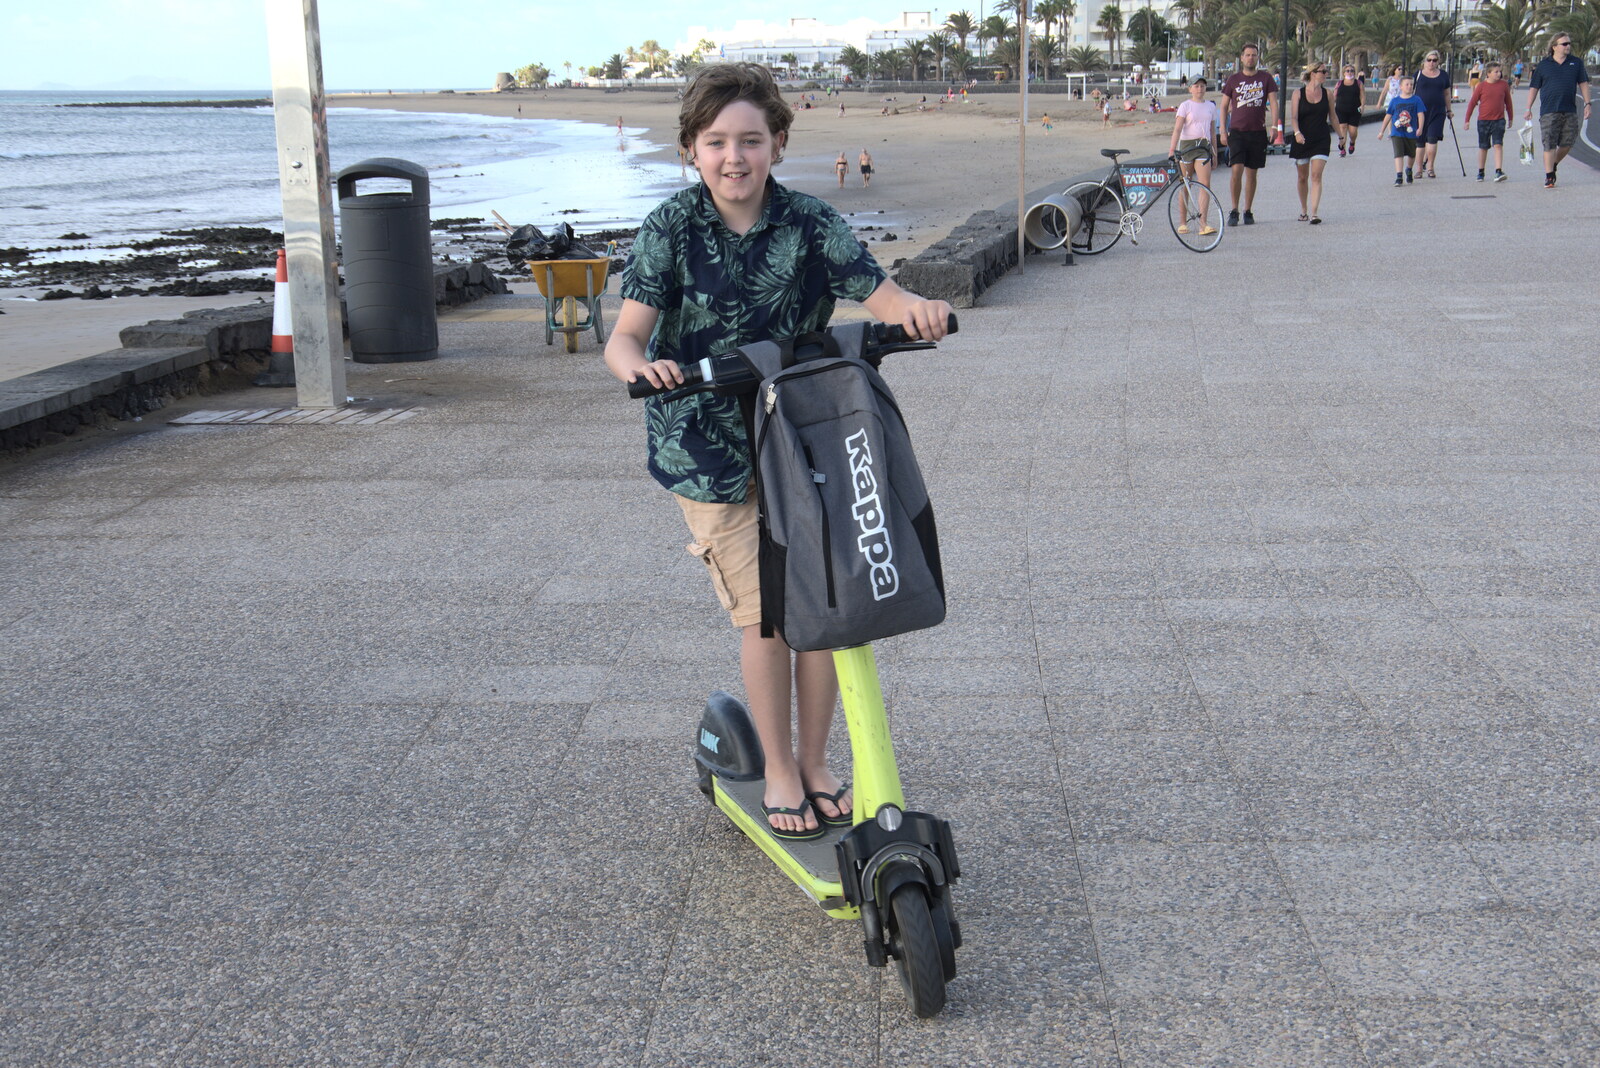 Fred scoots around near the beach from Five Days in Lanzarote, Canary Islands, Spain - 24th October 2021